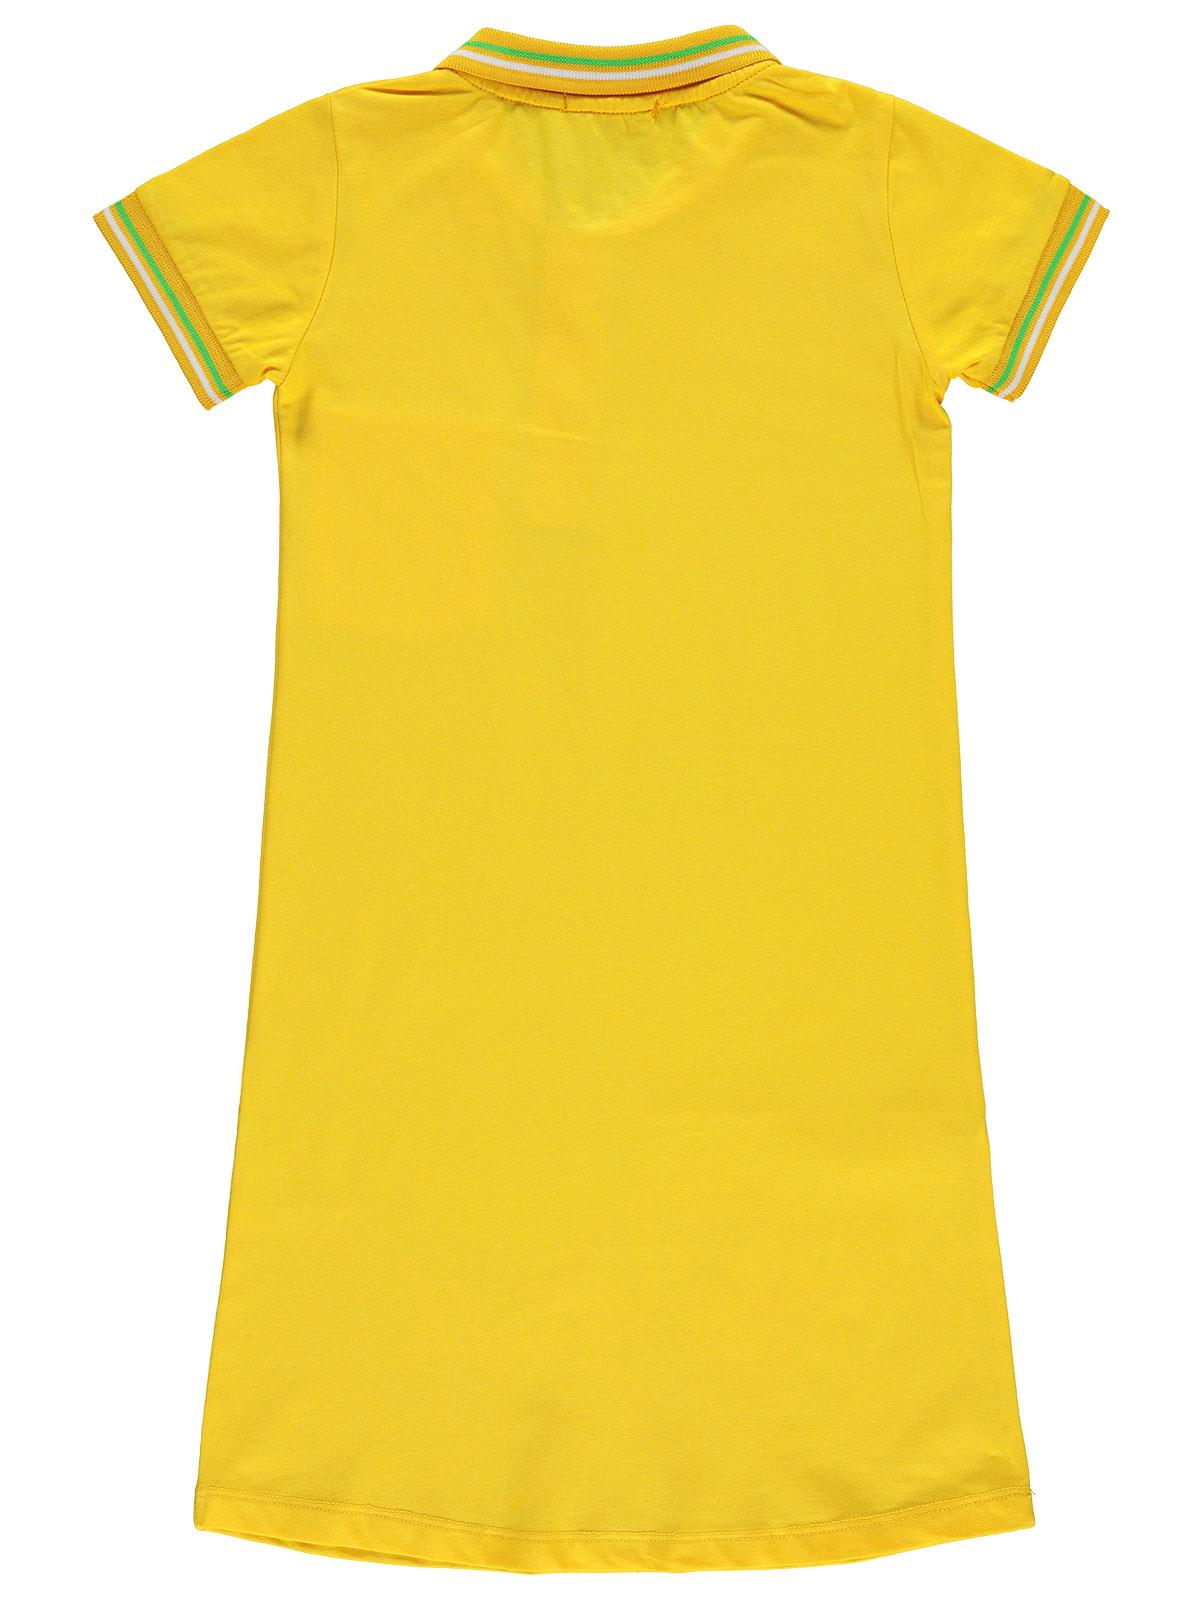 Civil Girls Tunic With Polo S-Tail #6910 (S-22)